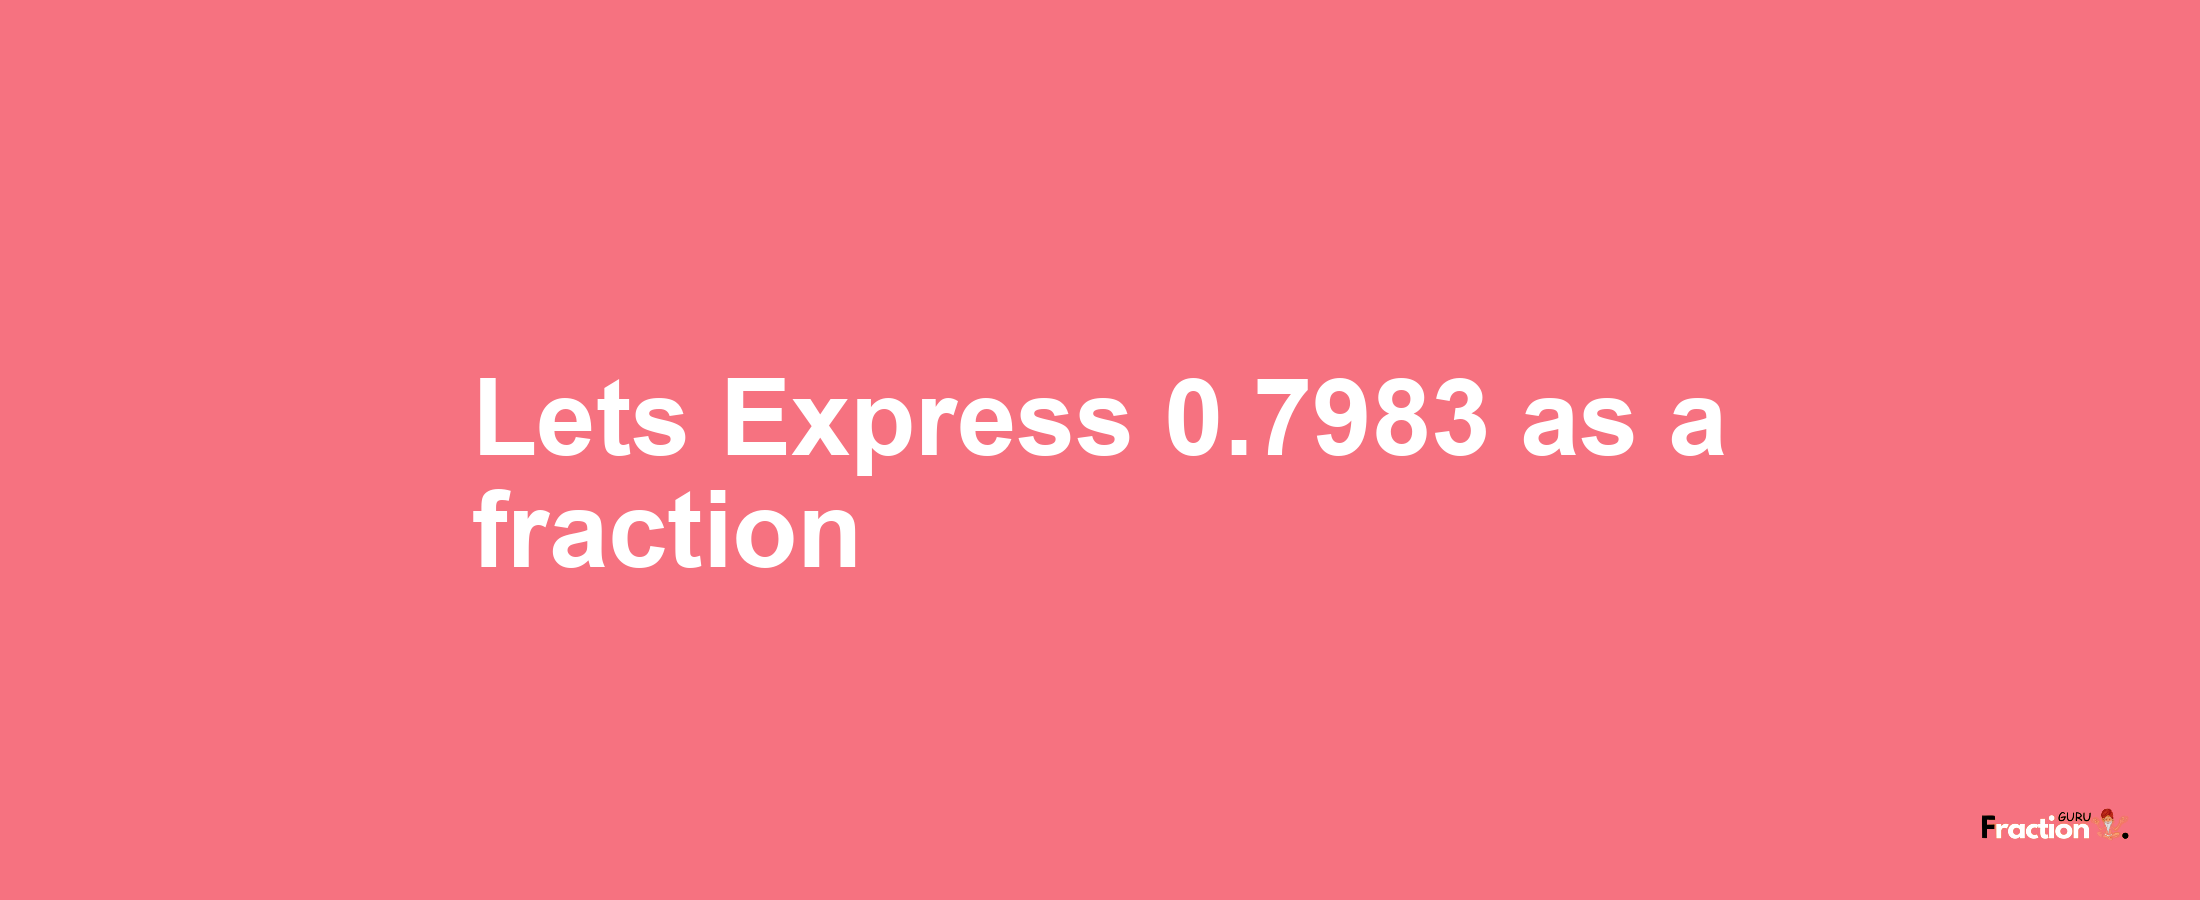 Lets Express 0.7983 as afraction